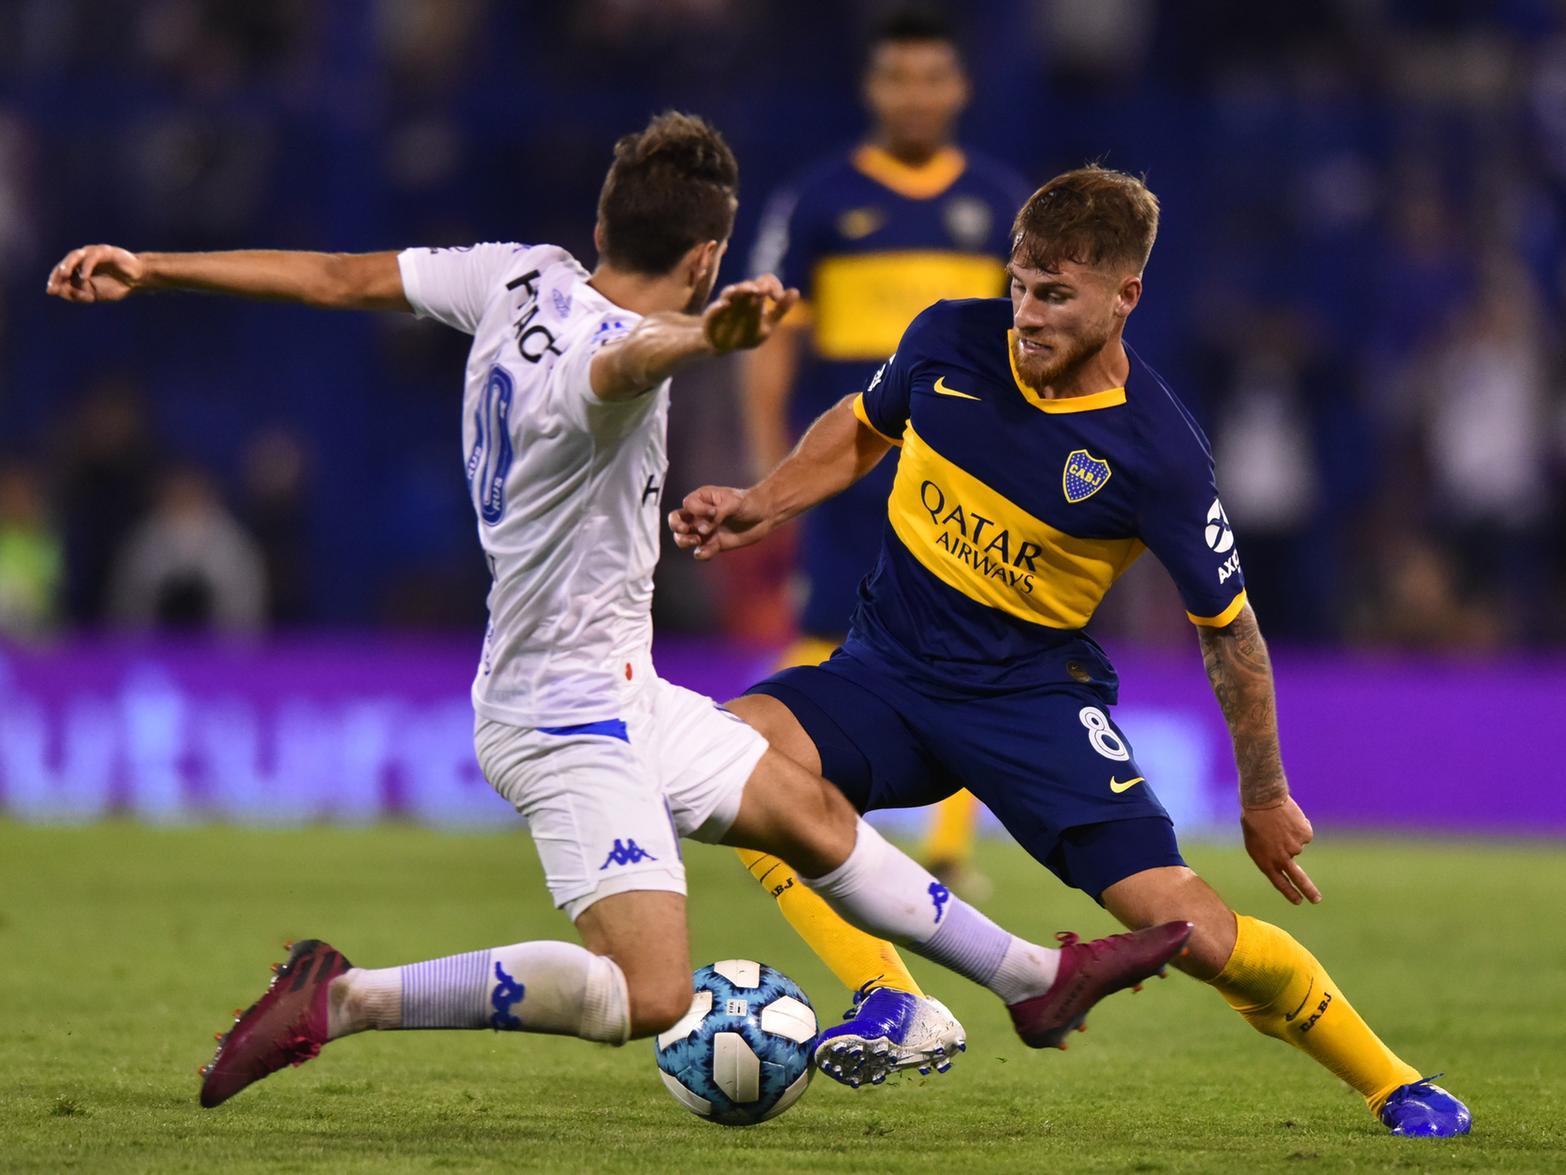 The Argentina international was on the bench for his country's 1-0 win over Brazil last weekend, and he's looked a quality player when featuring for Boca in the league.